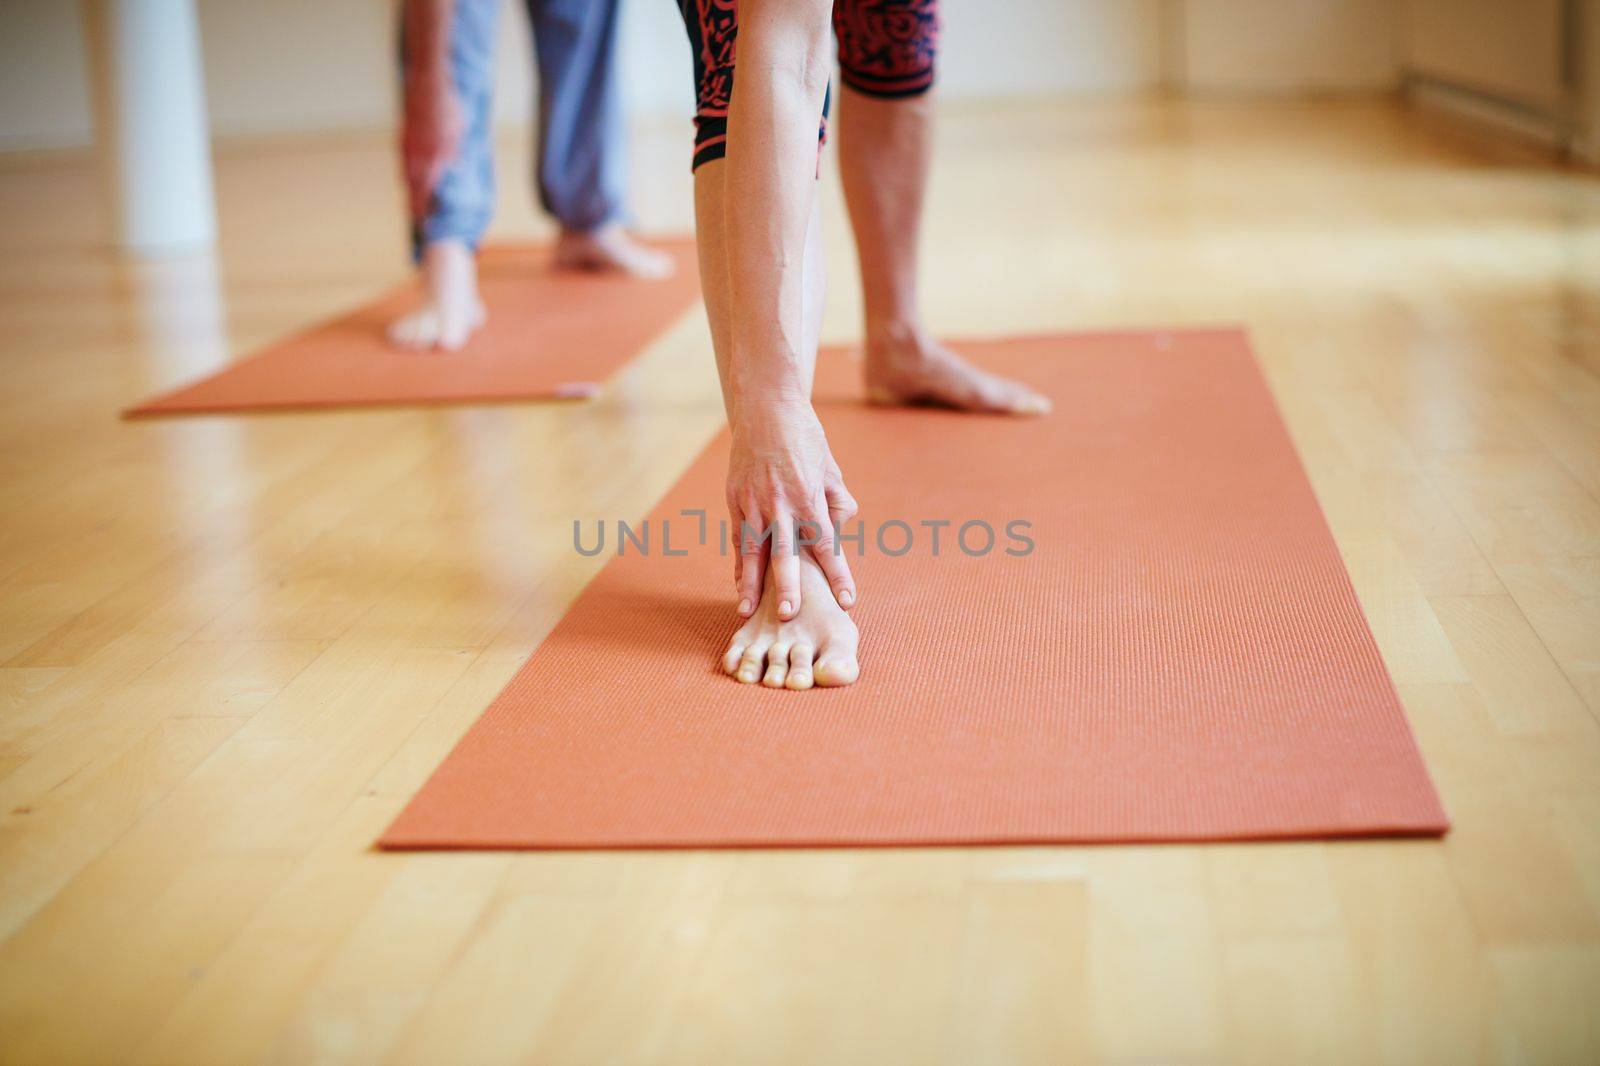 Yoga is part of their lifestyle. peoples legs as theyre doing yoga indoors